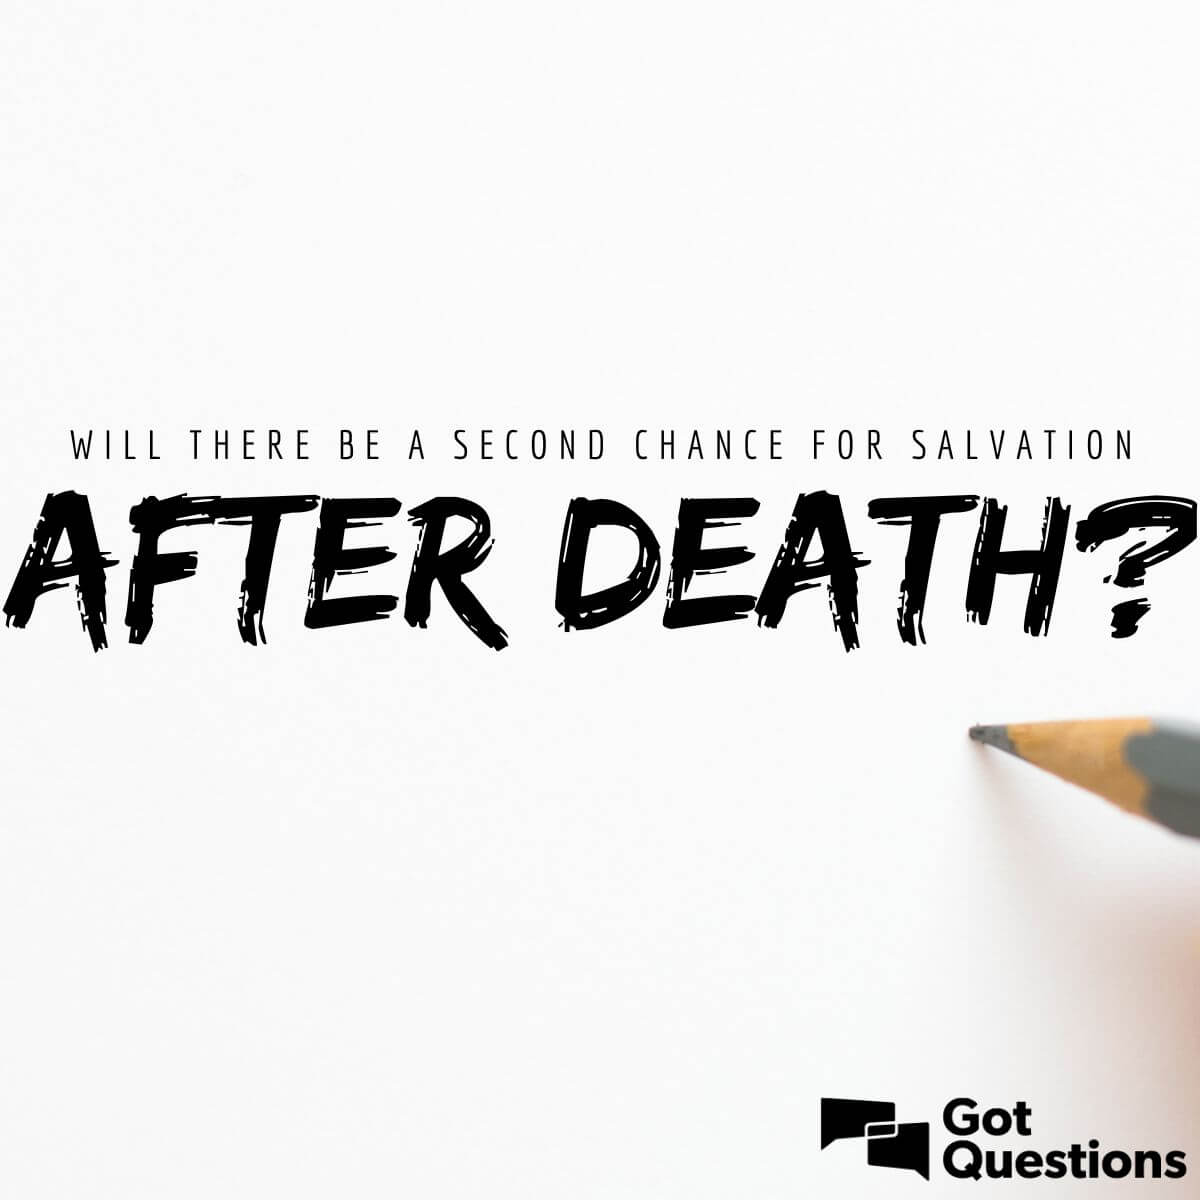 Will there be a second chance for salvation after death